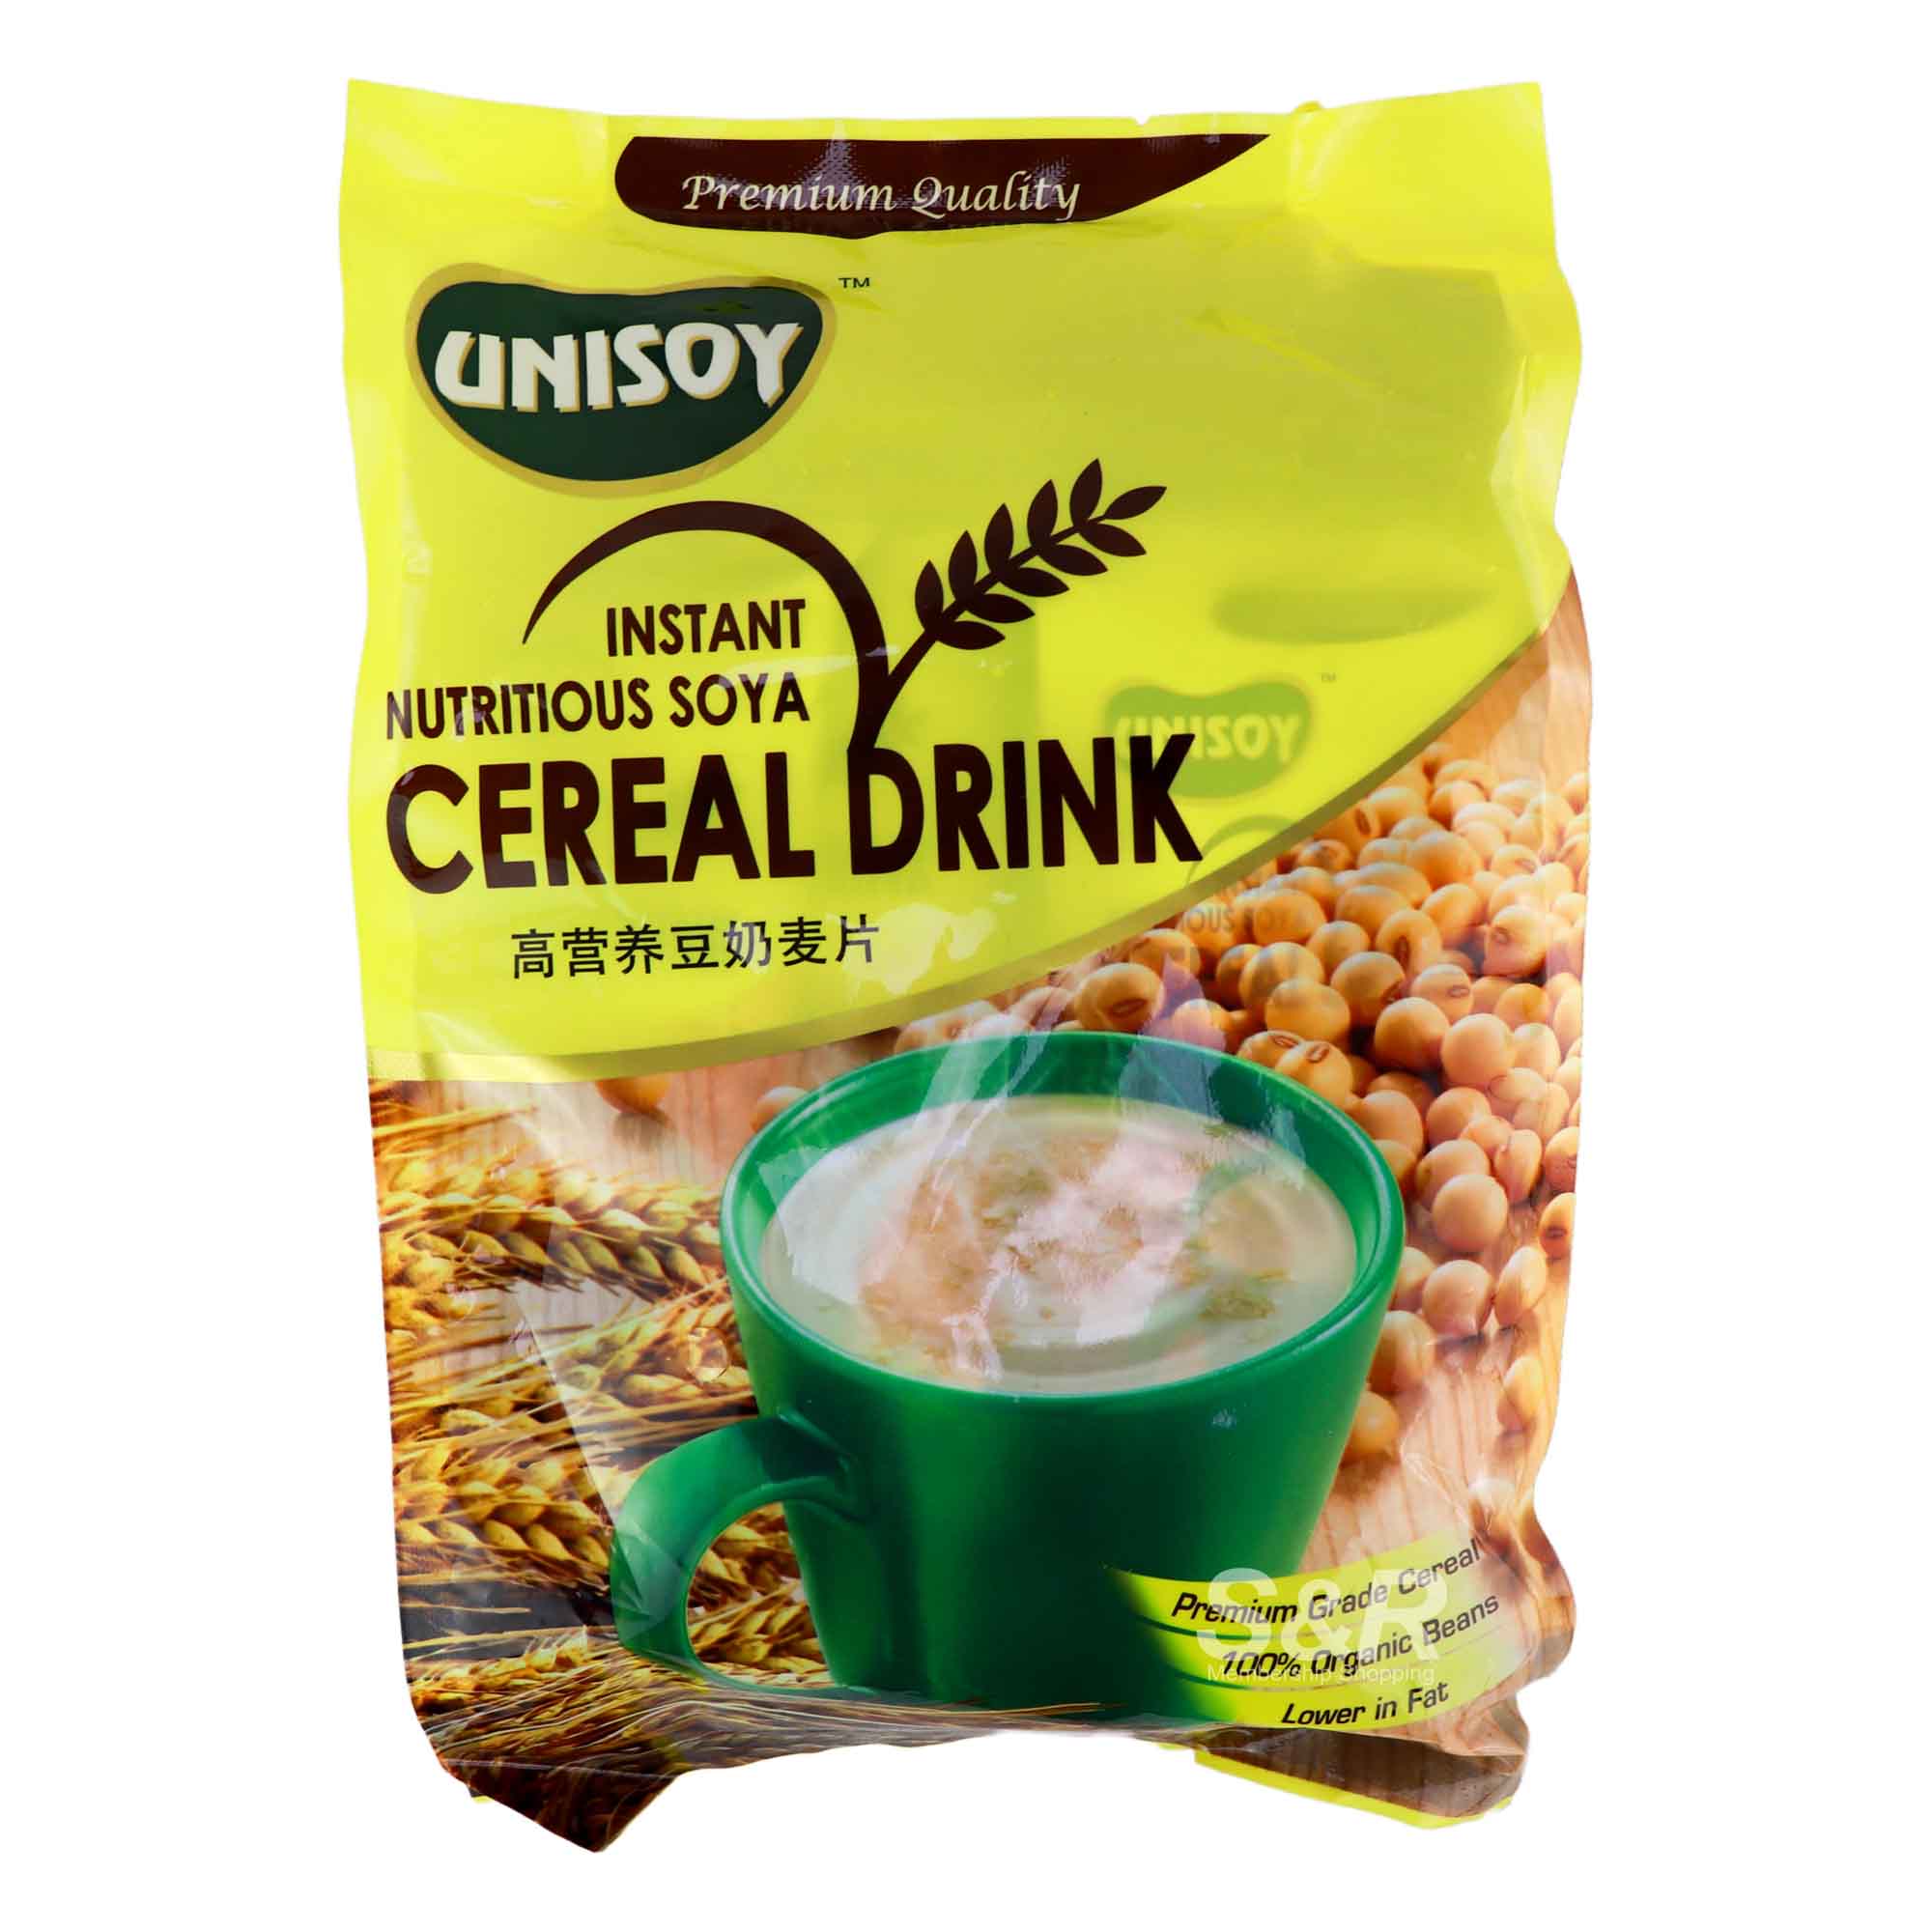 Unisoy Nutritious Soya Cereal Drink 12 sachets